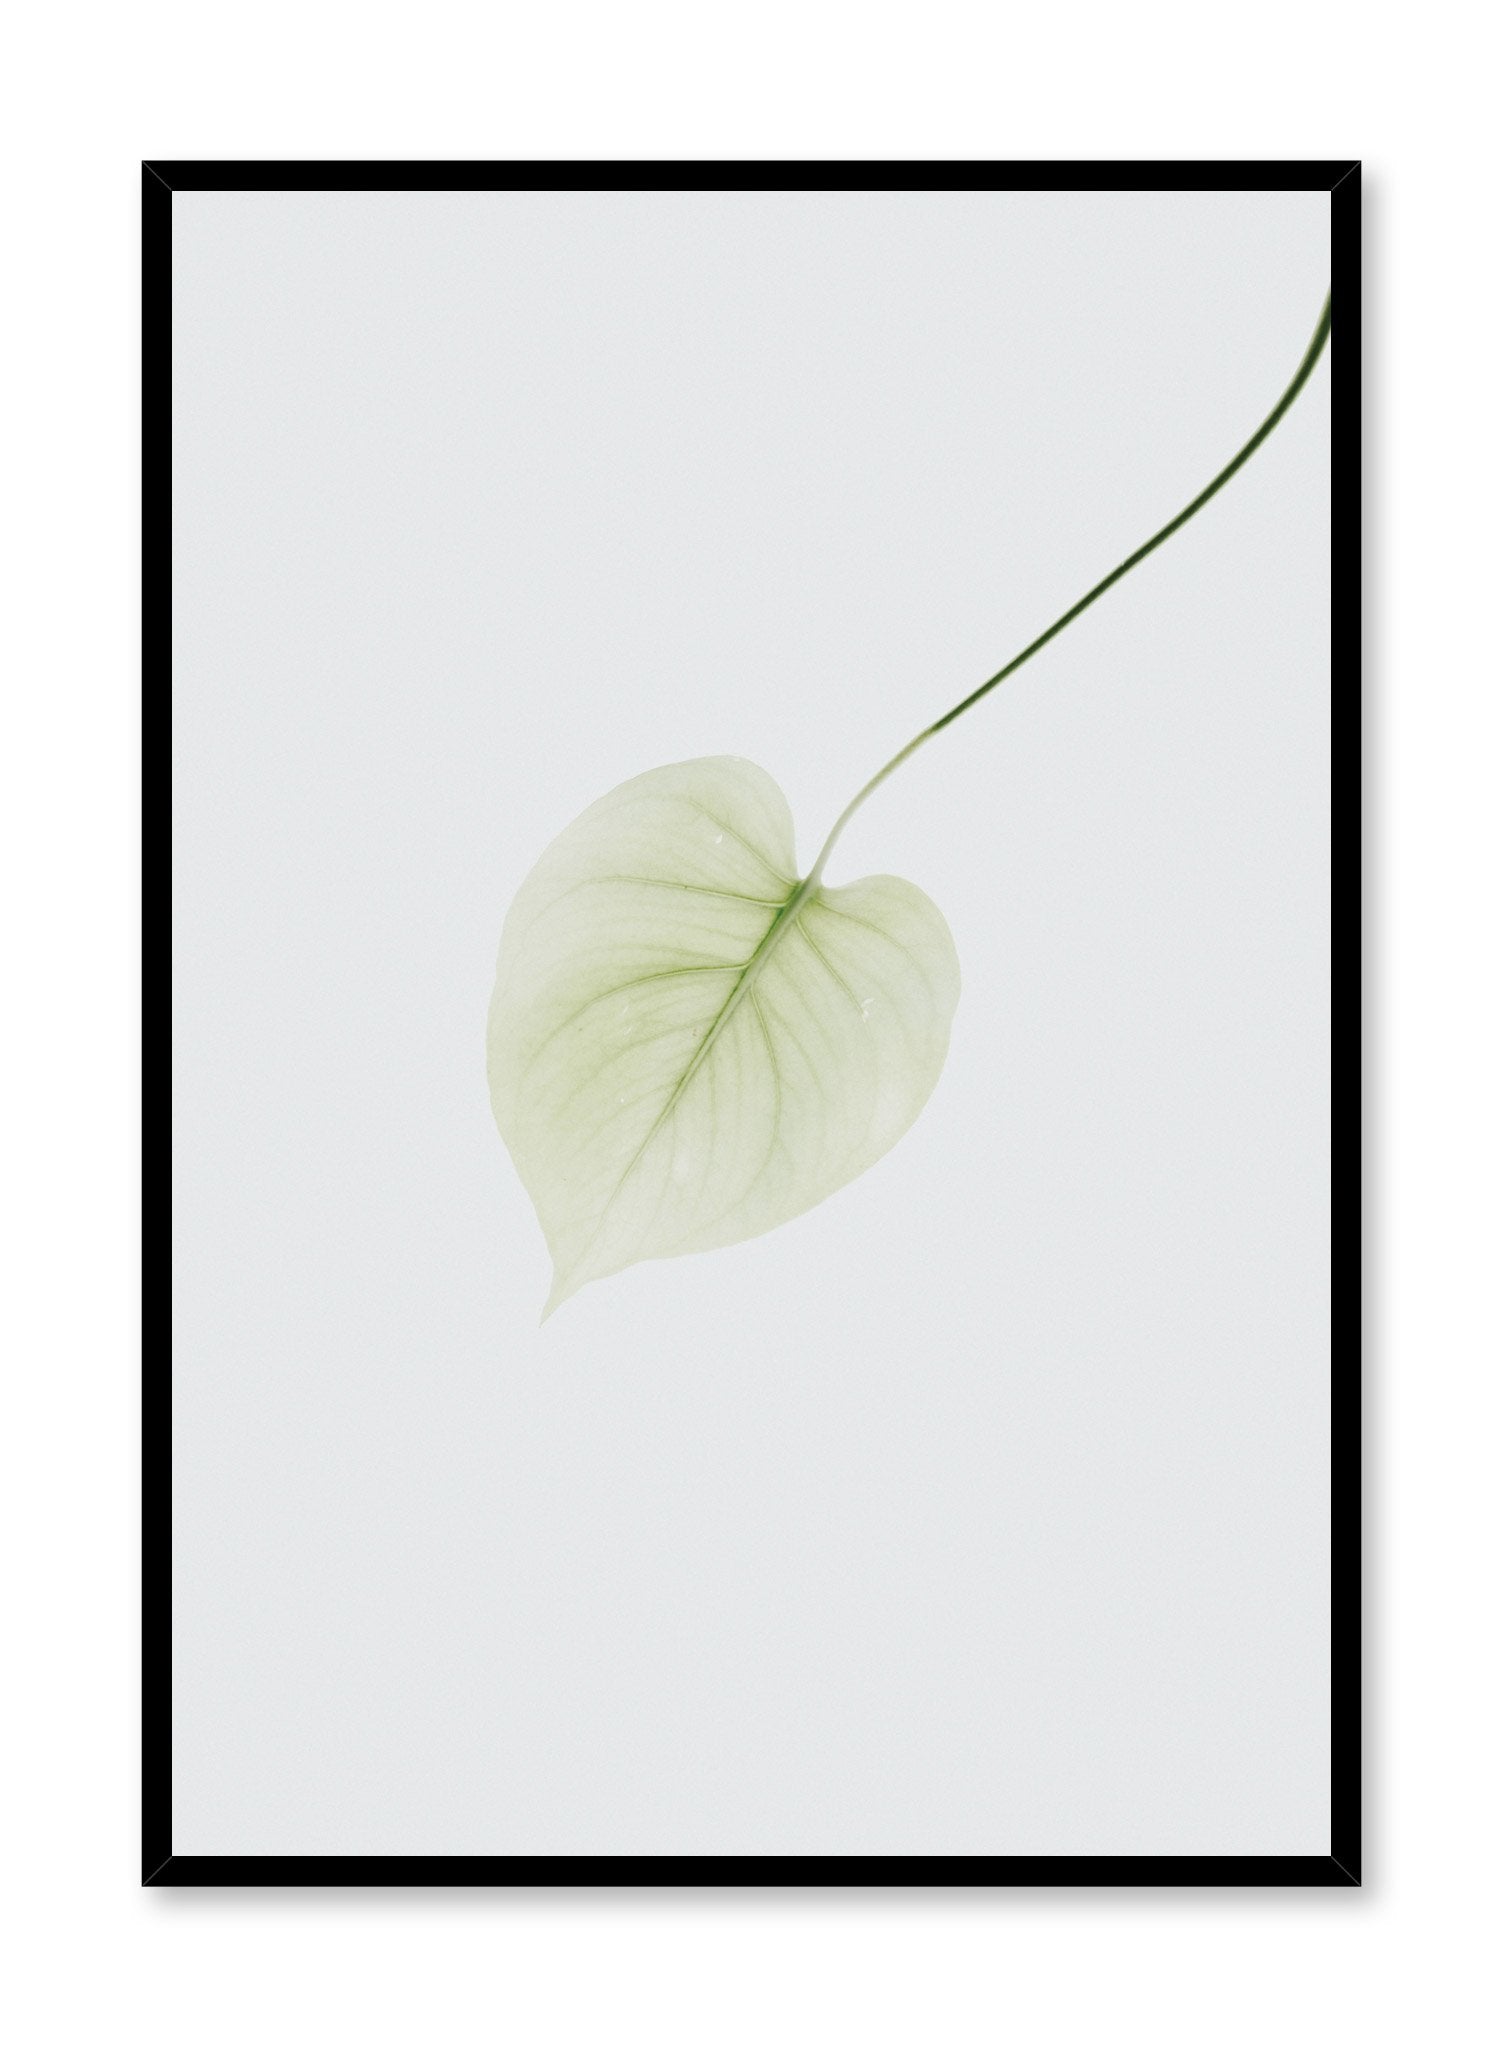 Minimalist design poster by Opposite Wall with Pothos Leaf photography